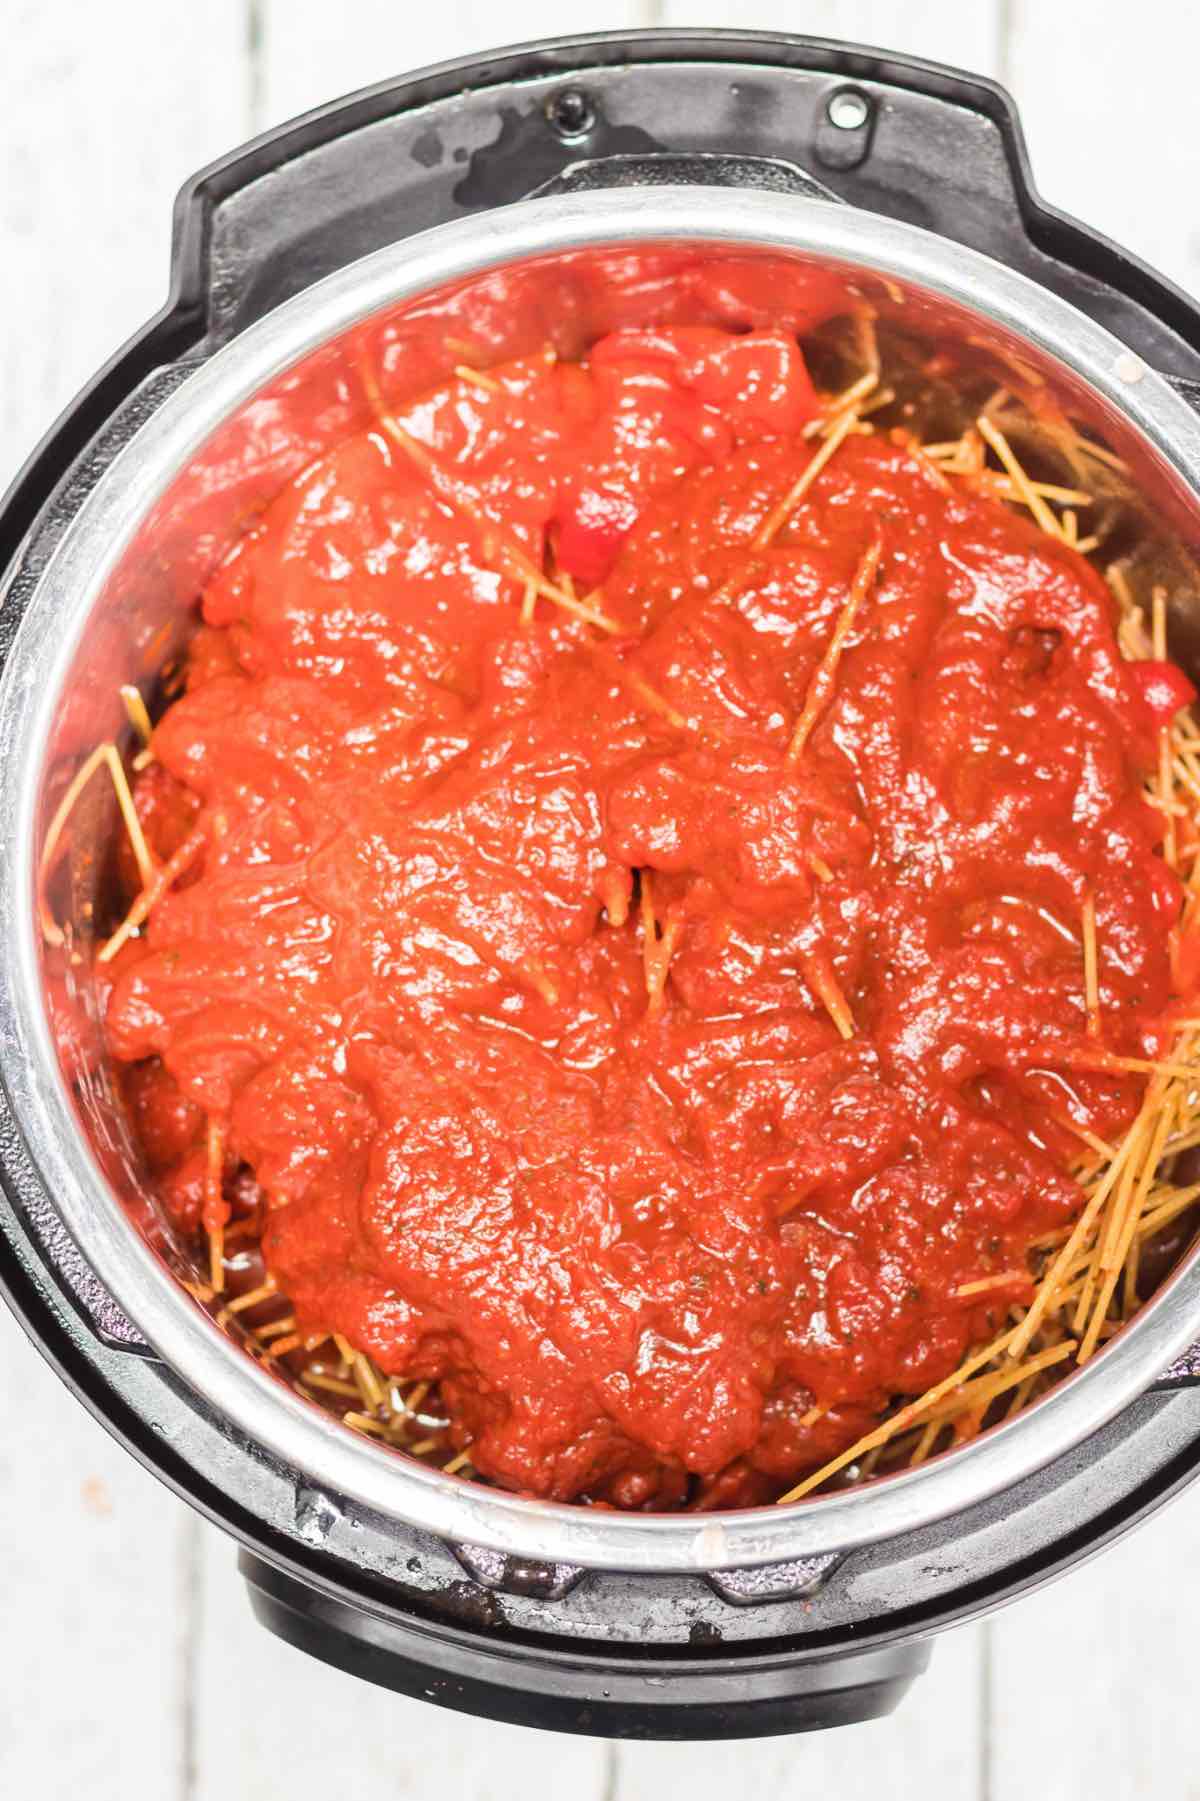 This instant pot spaghetti and meatballs is an easy one-pot recipe with mouth-watering homemade meatballs.